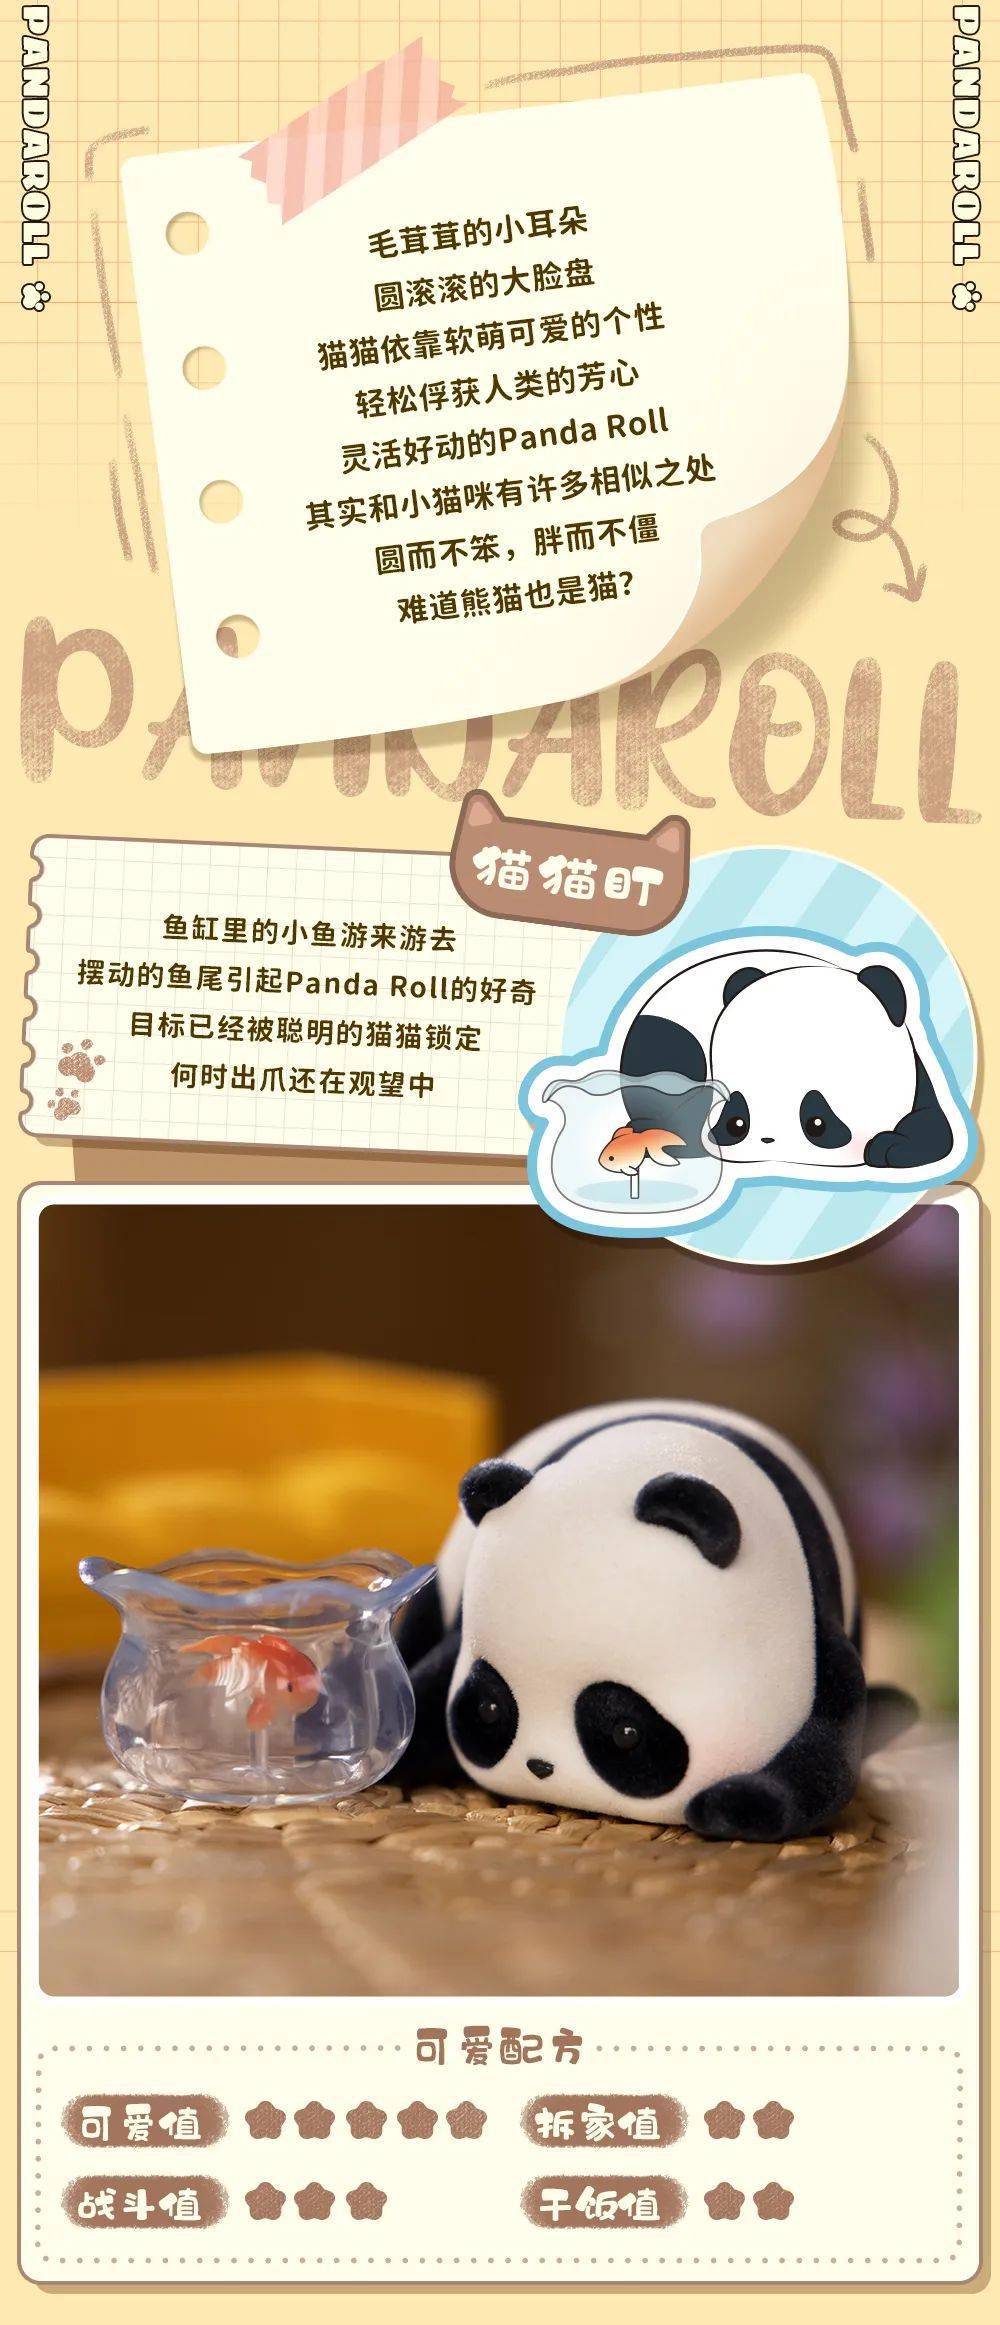 [52TOYS] PANDA ROLL - Pandas Are Also Cats